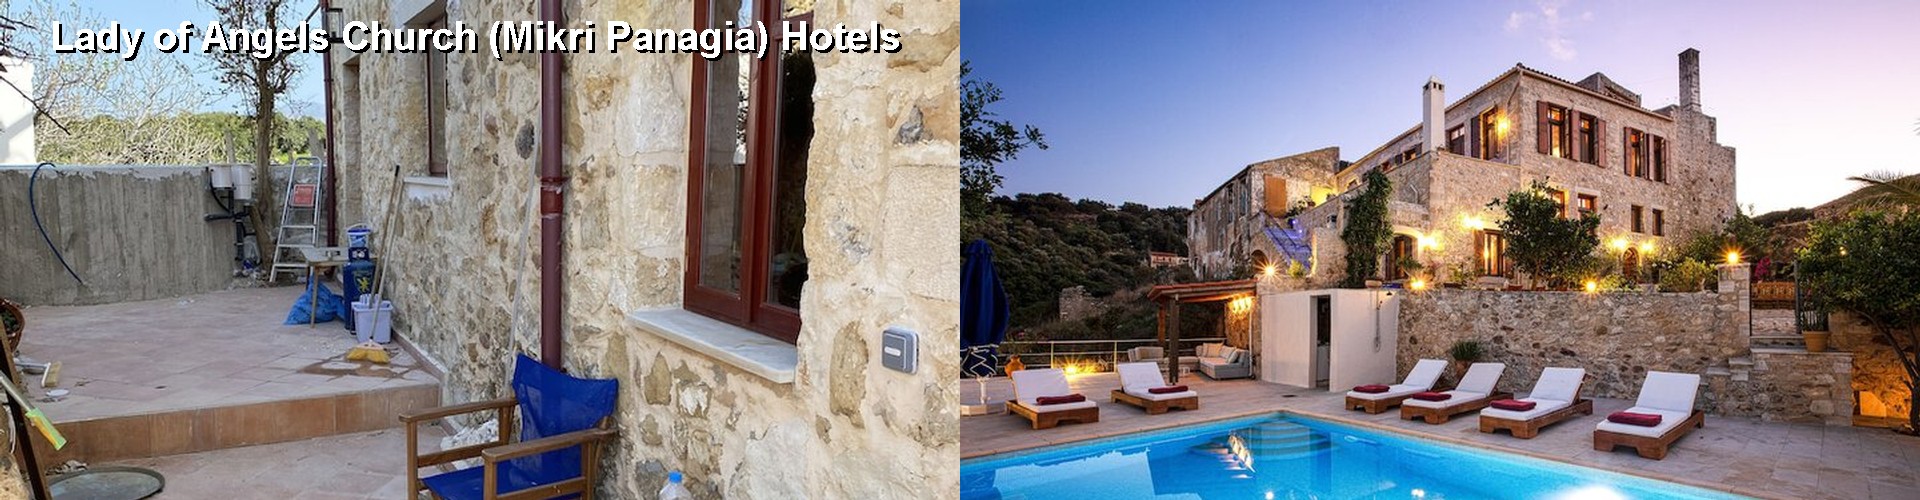 5 Best Hotels near Lady of Angels Church (Mikri Panagia)